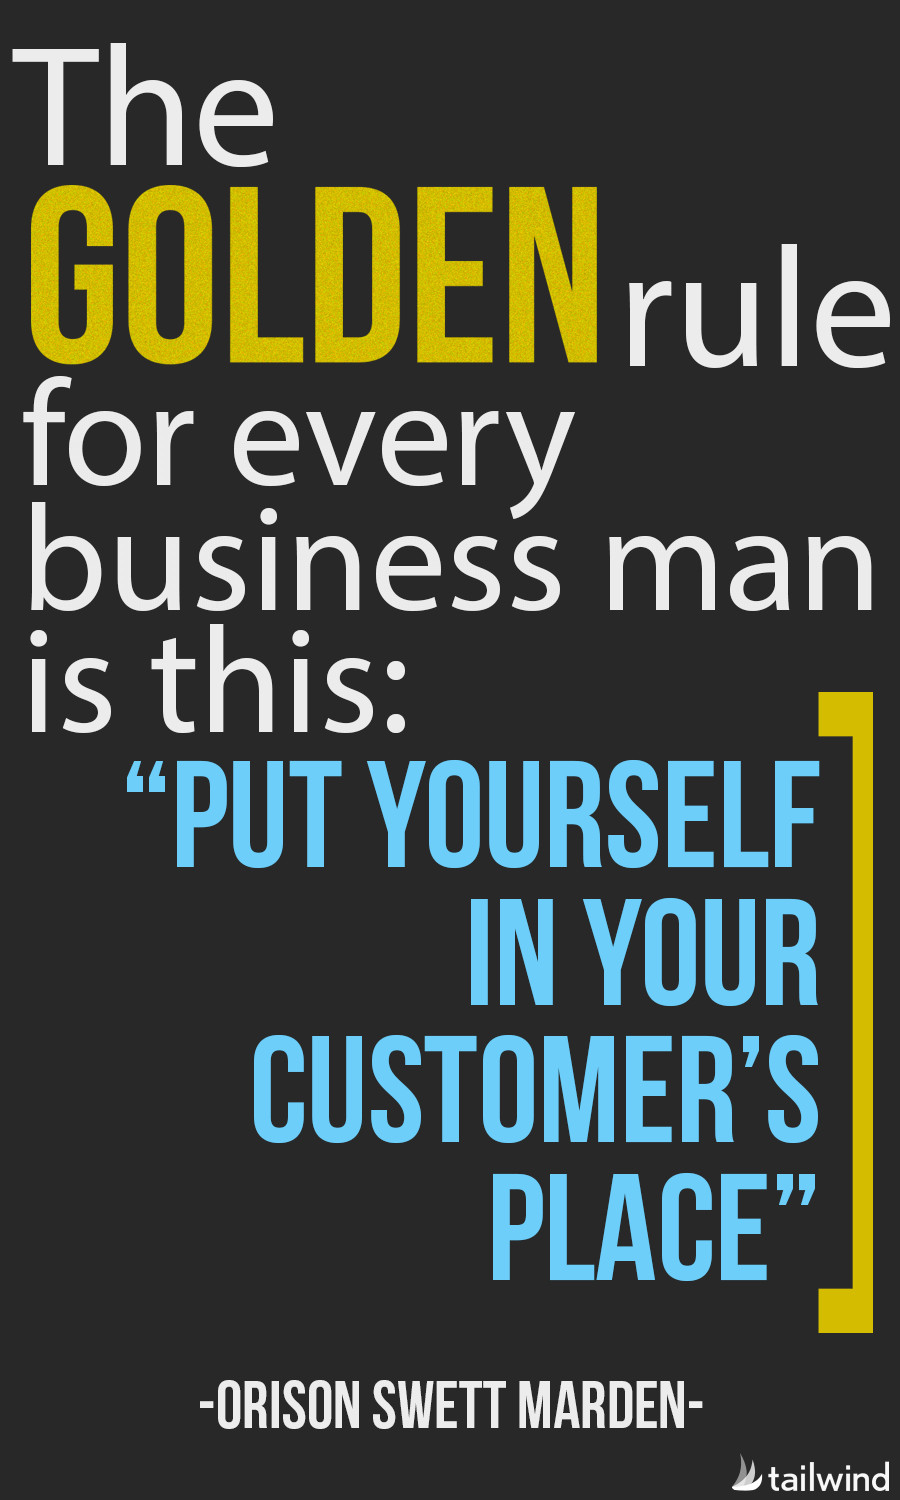 Inspirational Quotes For Business
 36 of Our Favorite Business Quotes Tailwind Blog